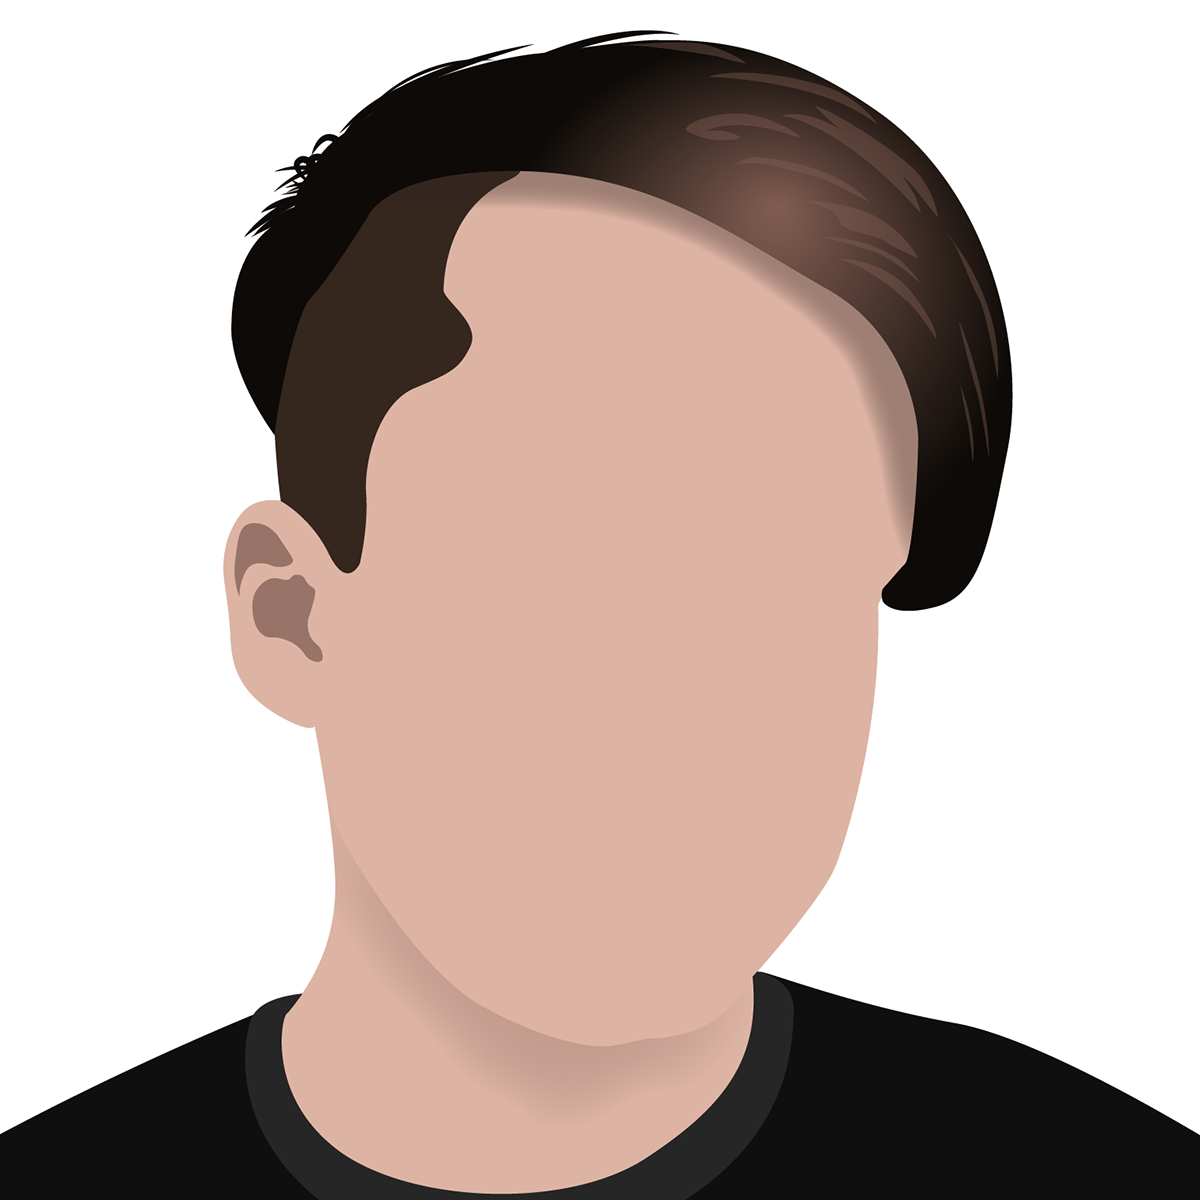 Channel Gaming face minimalistic Silhouette